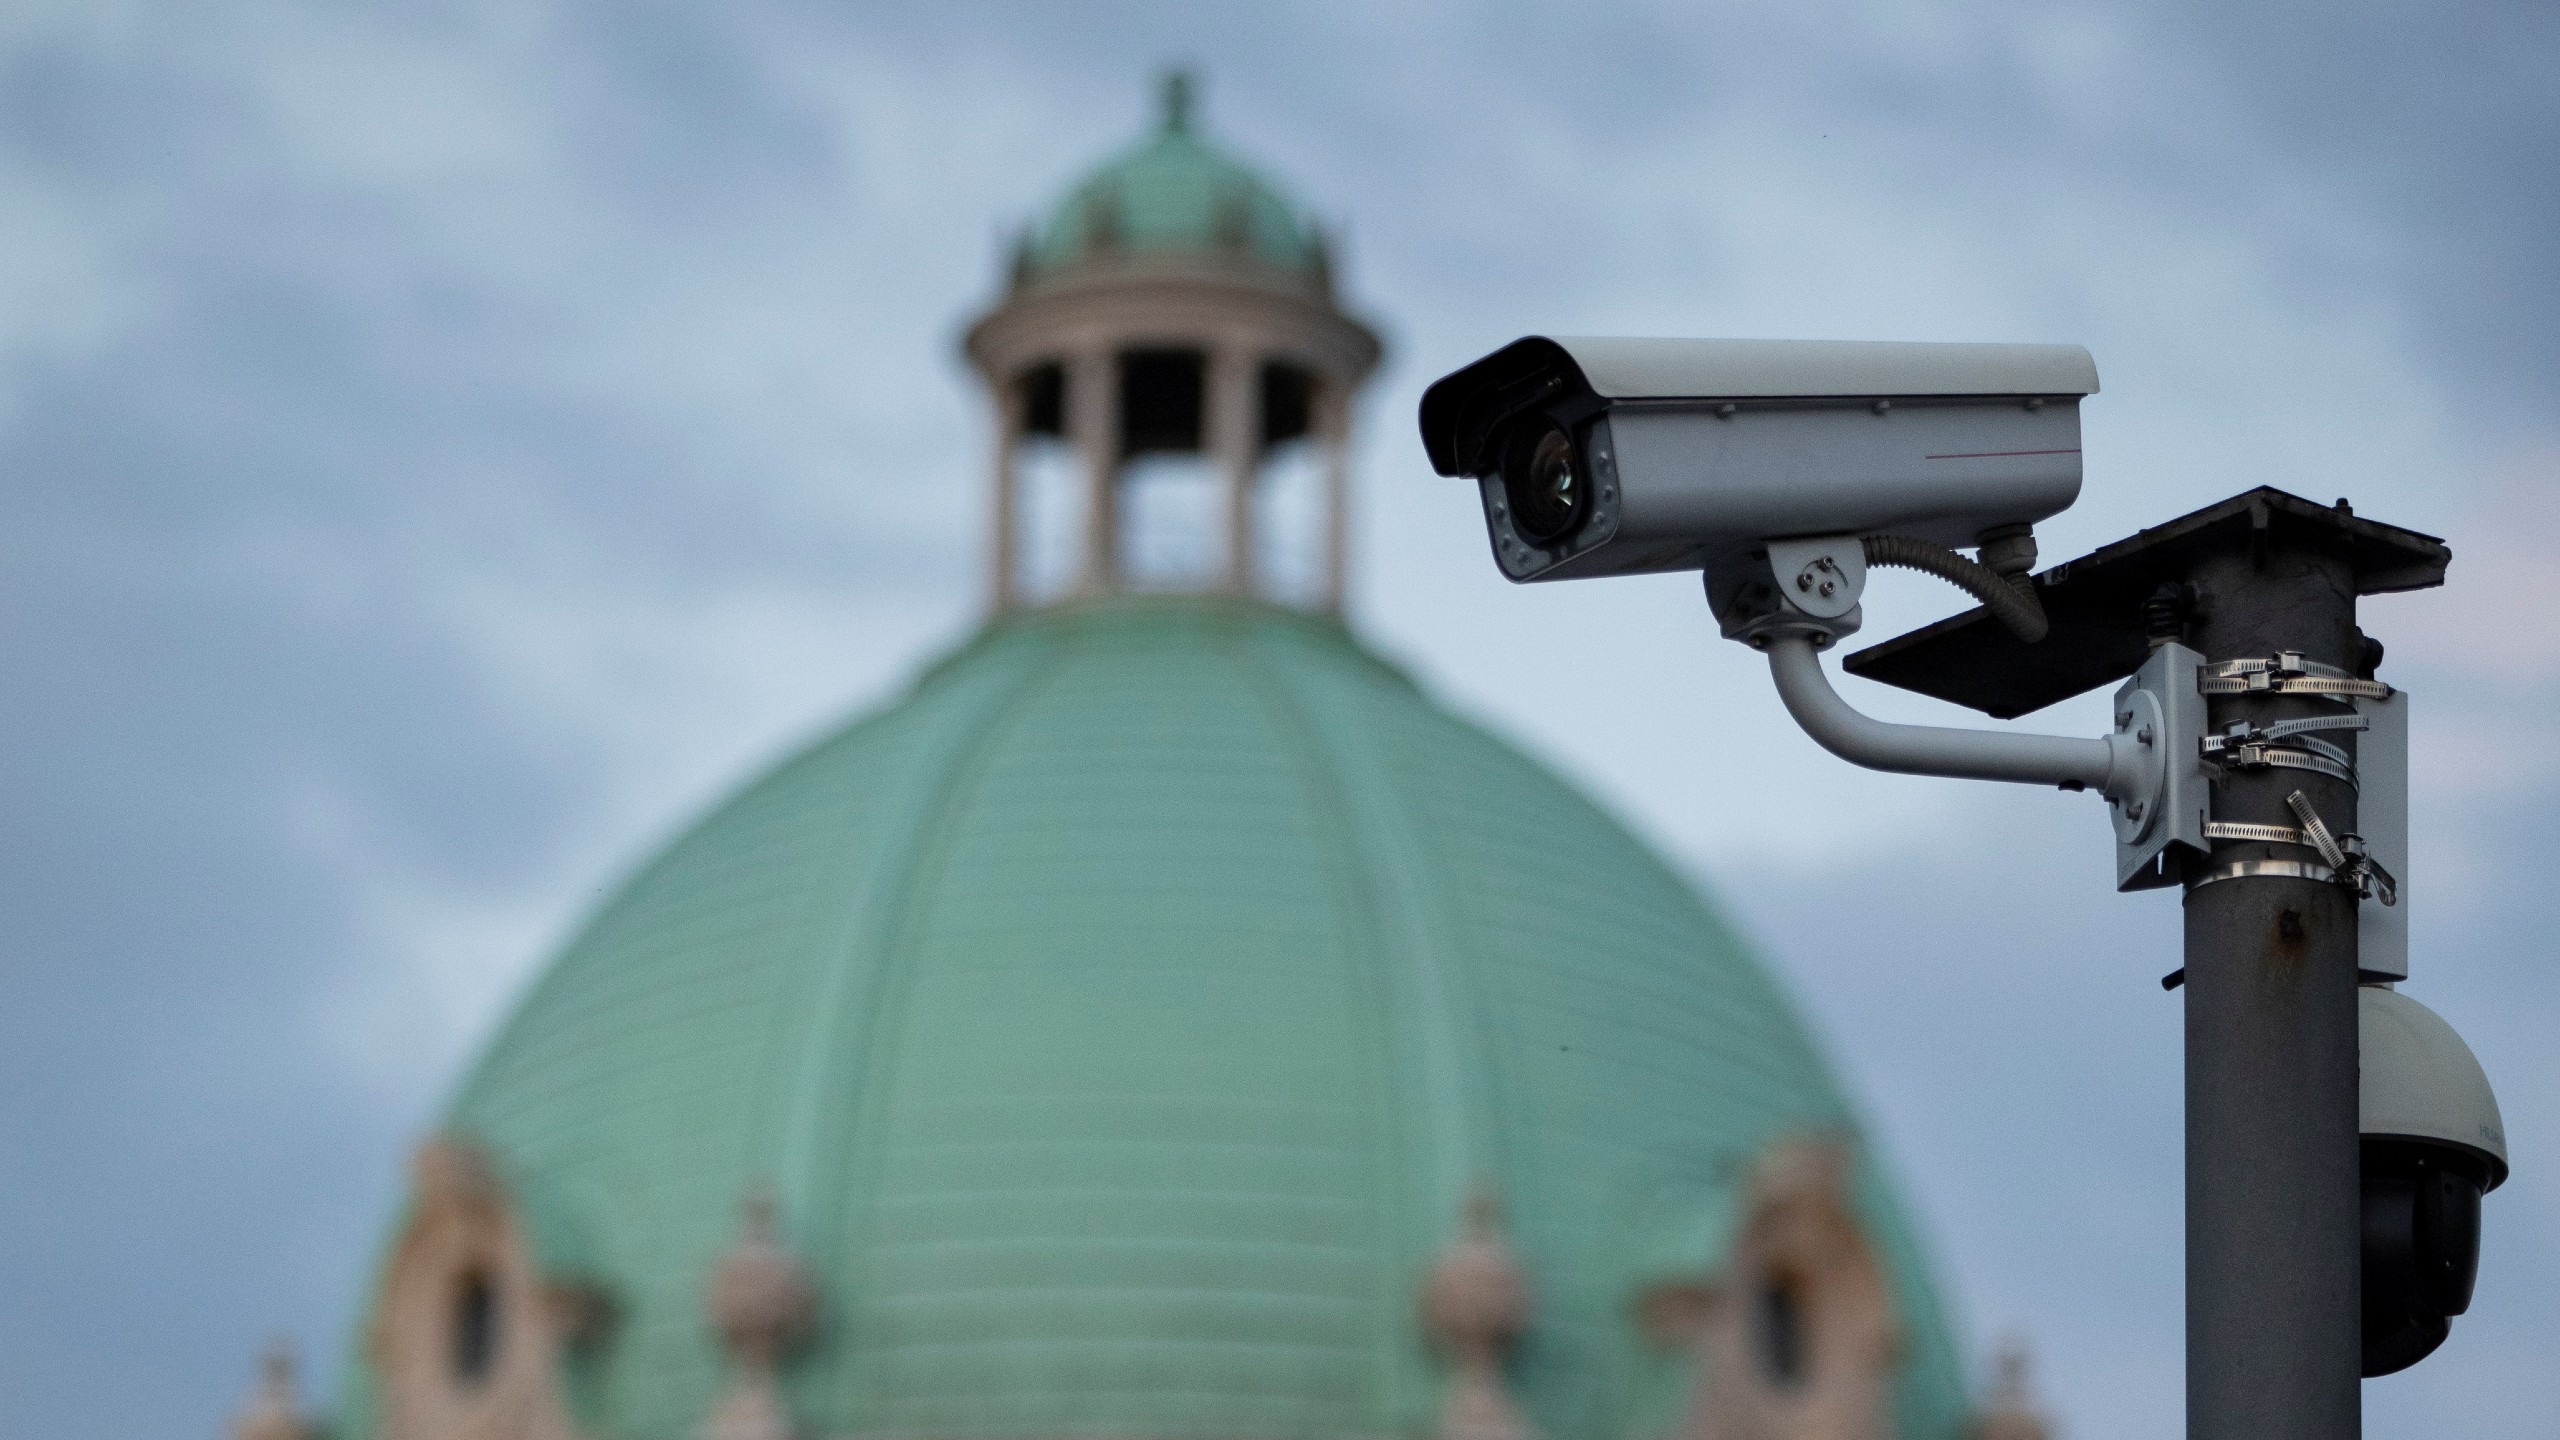 Photo: Surveillance camera is seen in front of the Serbian Parliament building in Belgrade, Serbia, August 12, 2020. Picture taken August 12, 2020. Credit: REUTERS/Marko Djurica